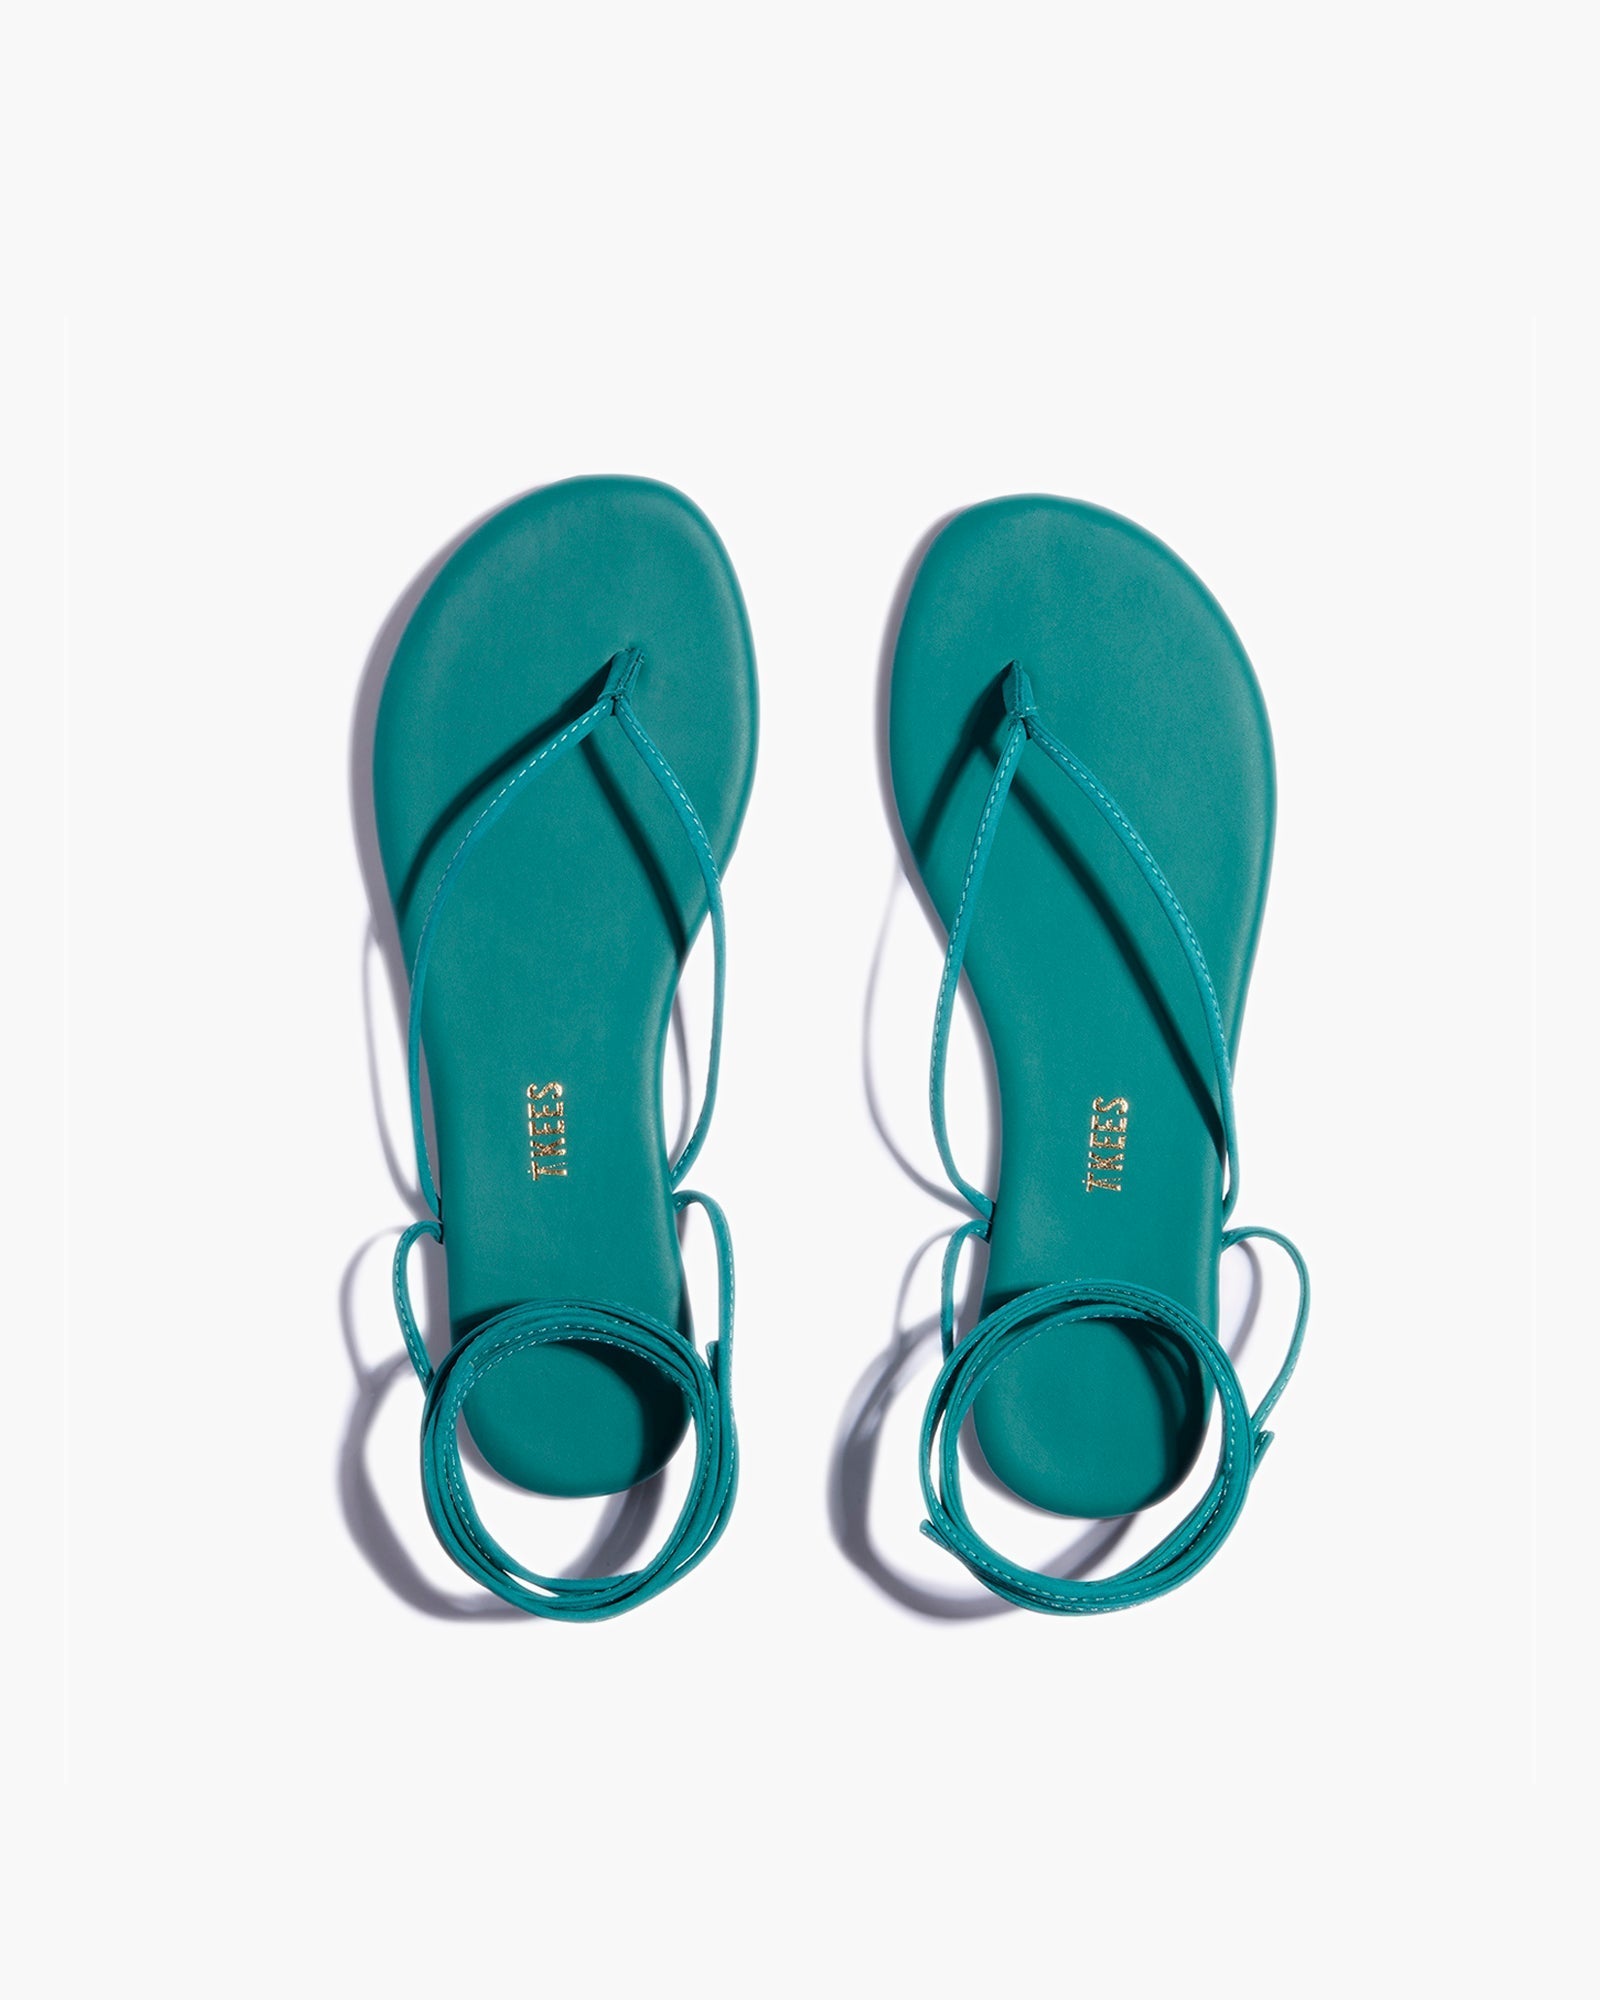 TKEES Lilu Pigments Women's Sandals Turquoise | IQX428306